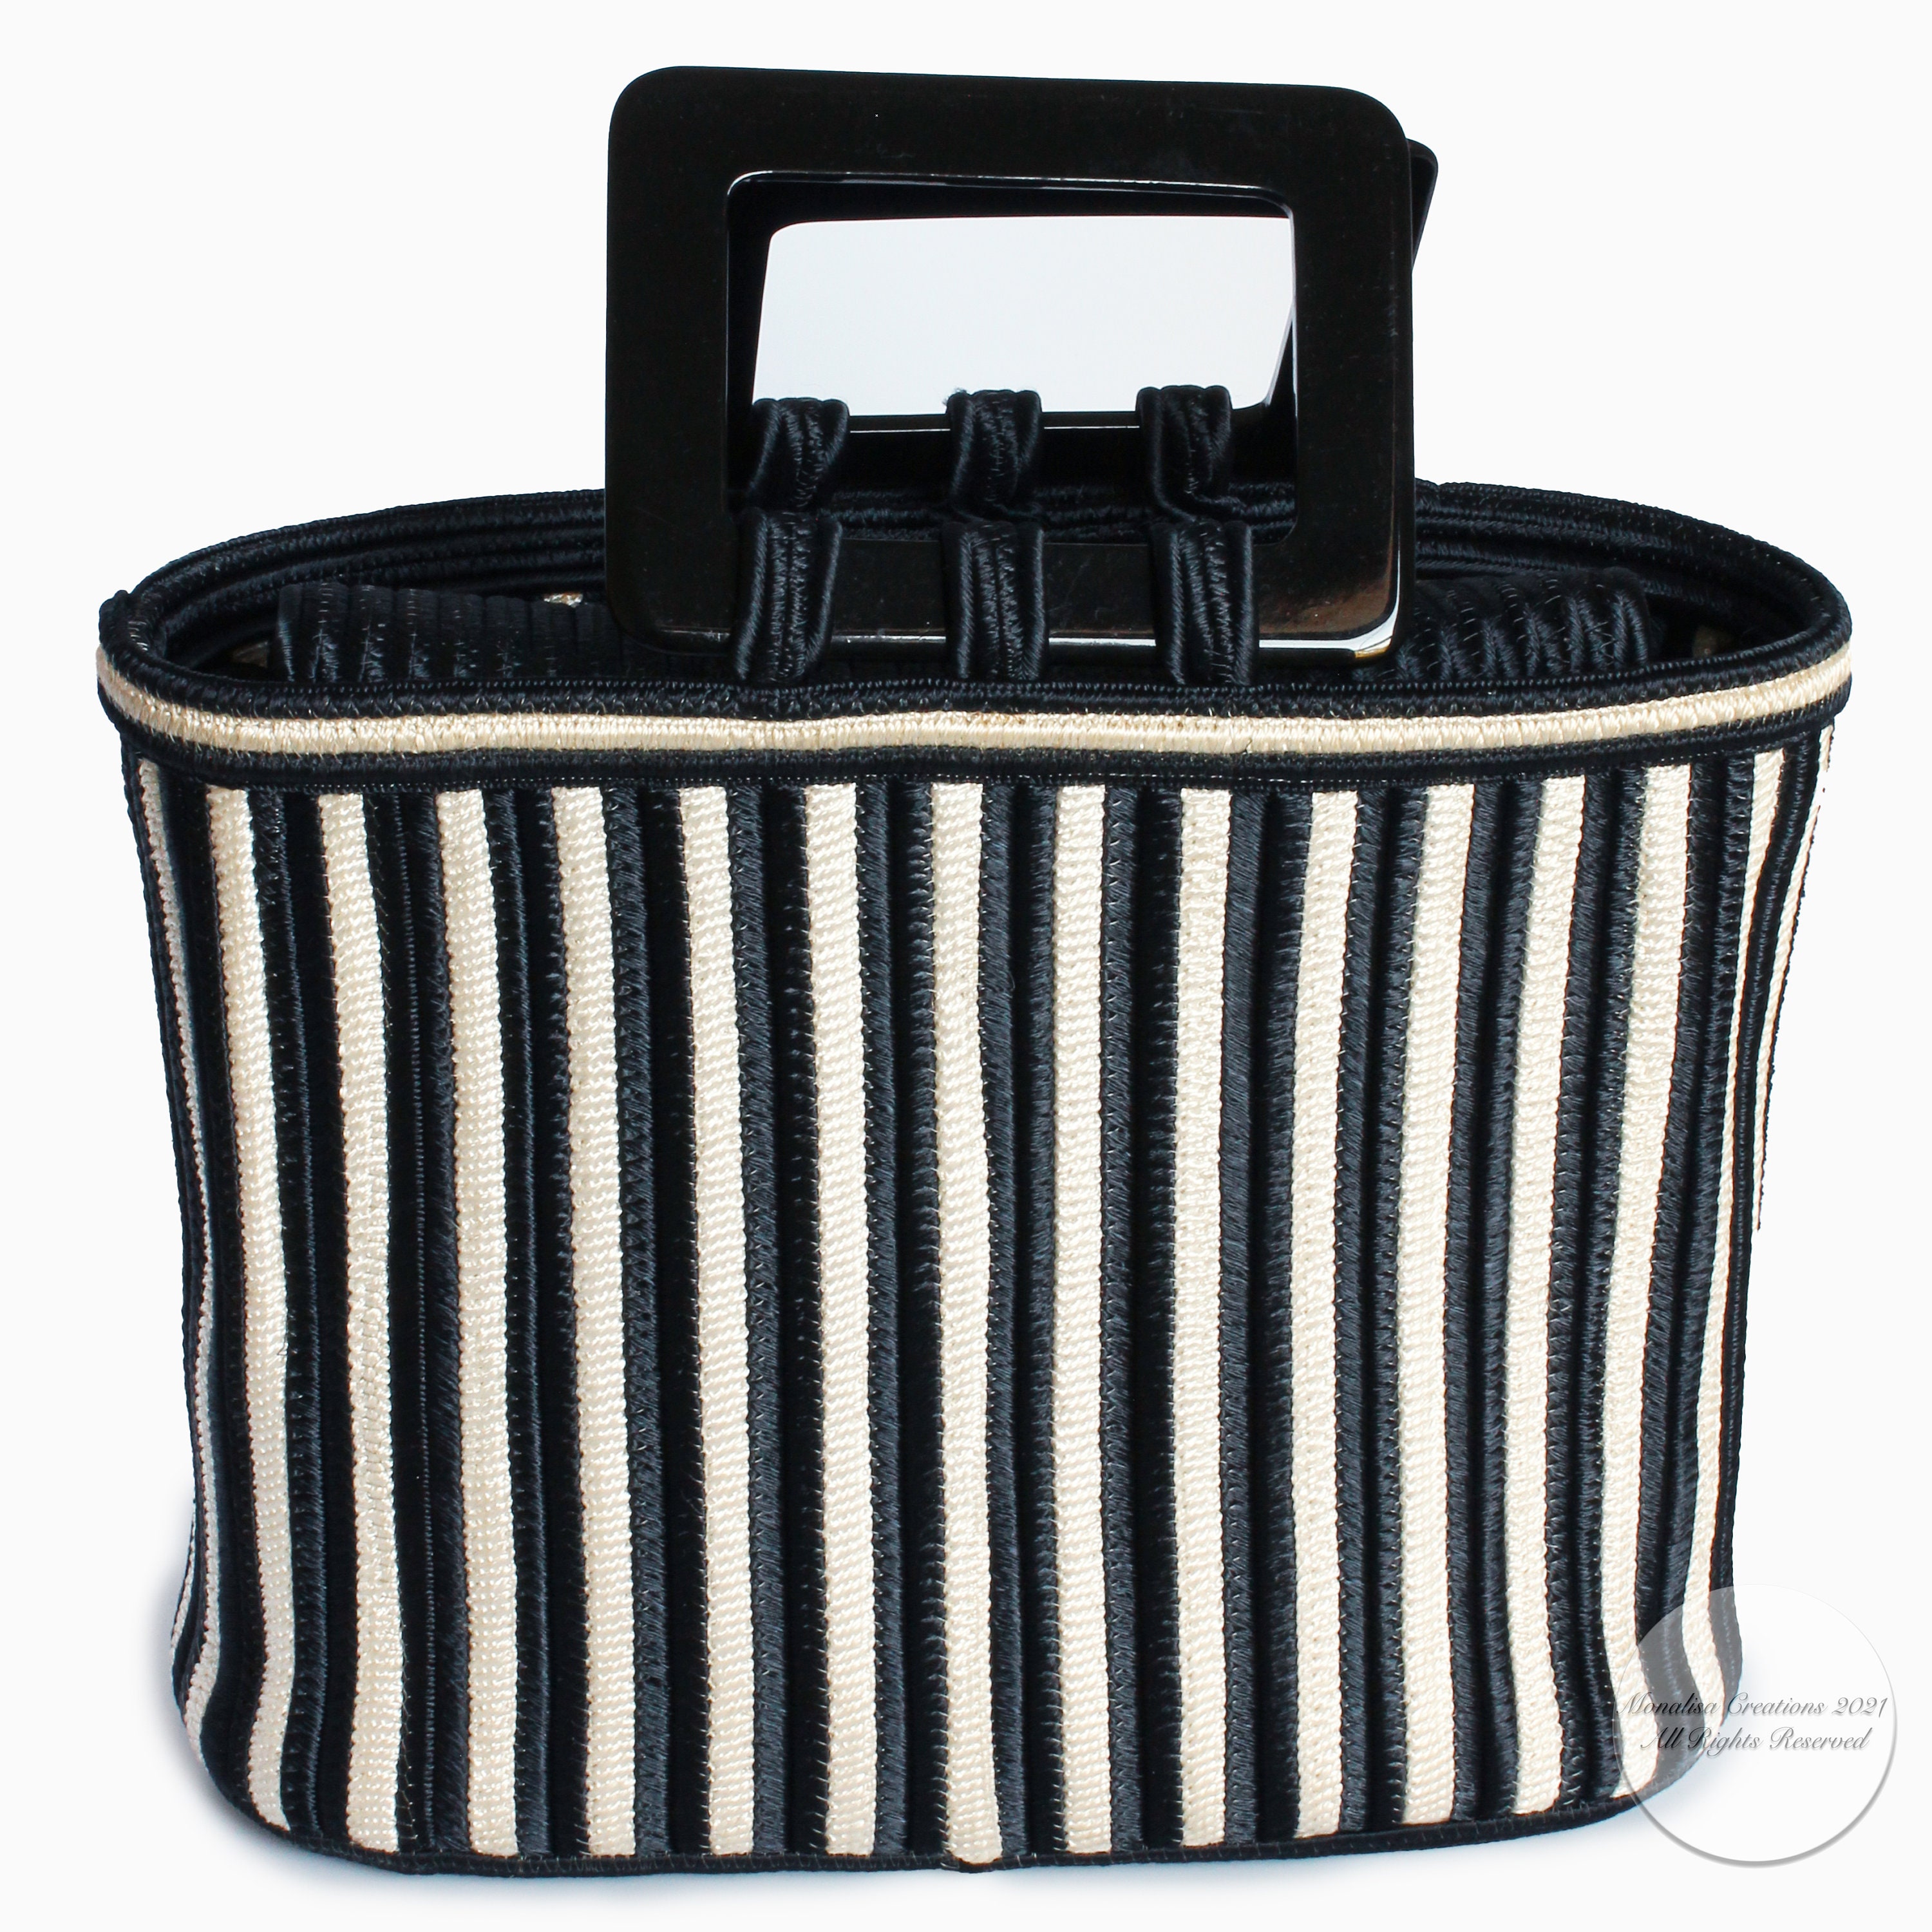 Yves Saint Laurent Striped Logo Embroidered Clutch Bag